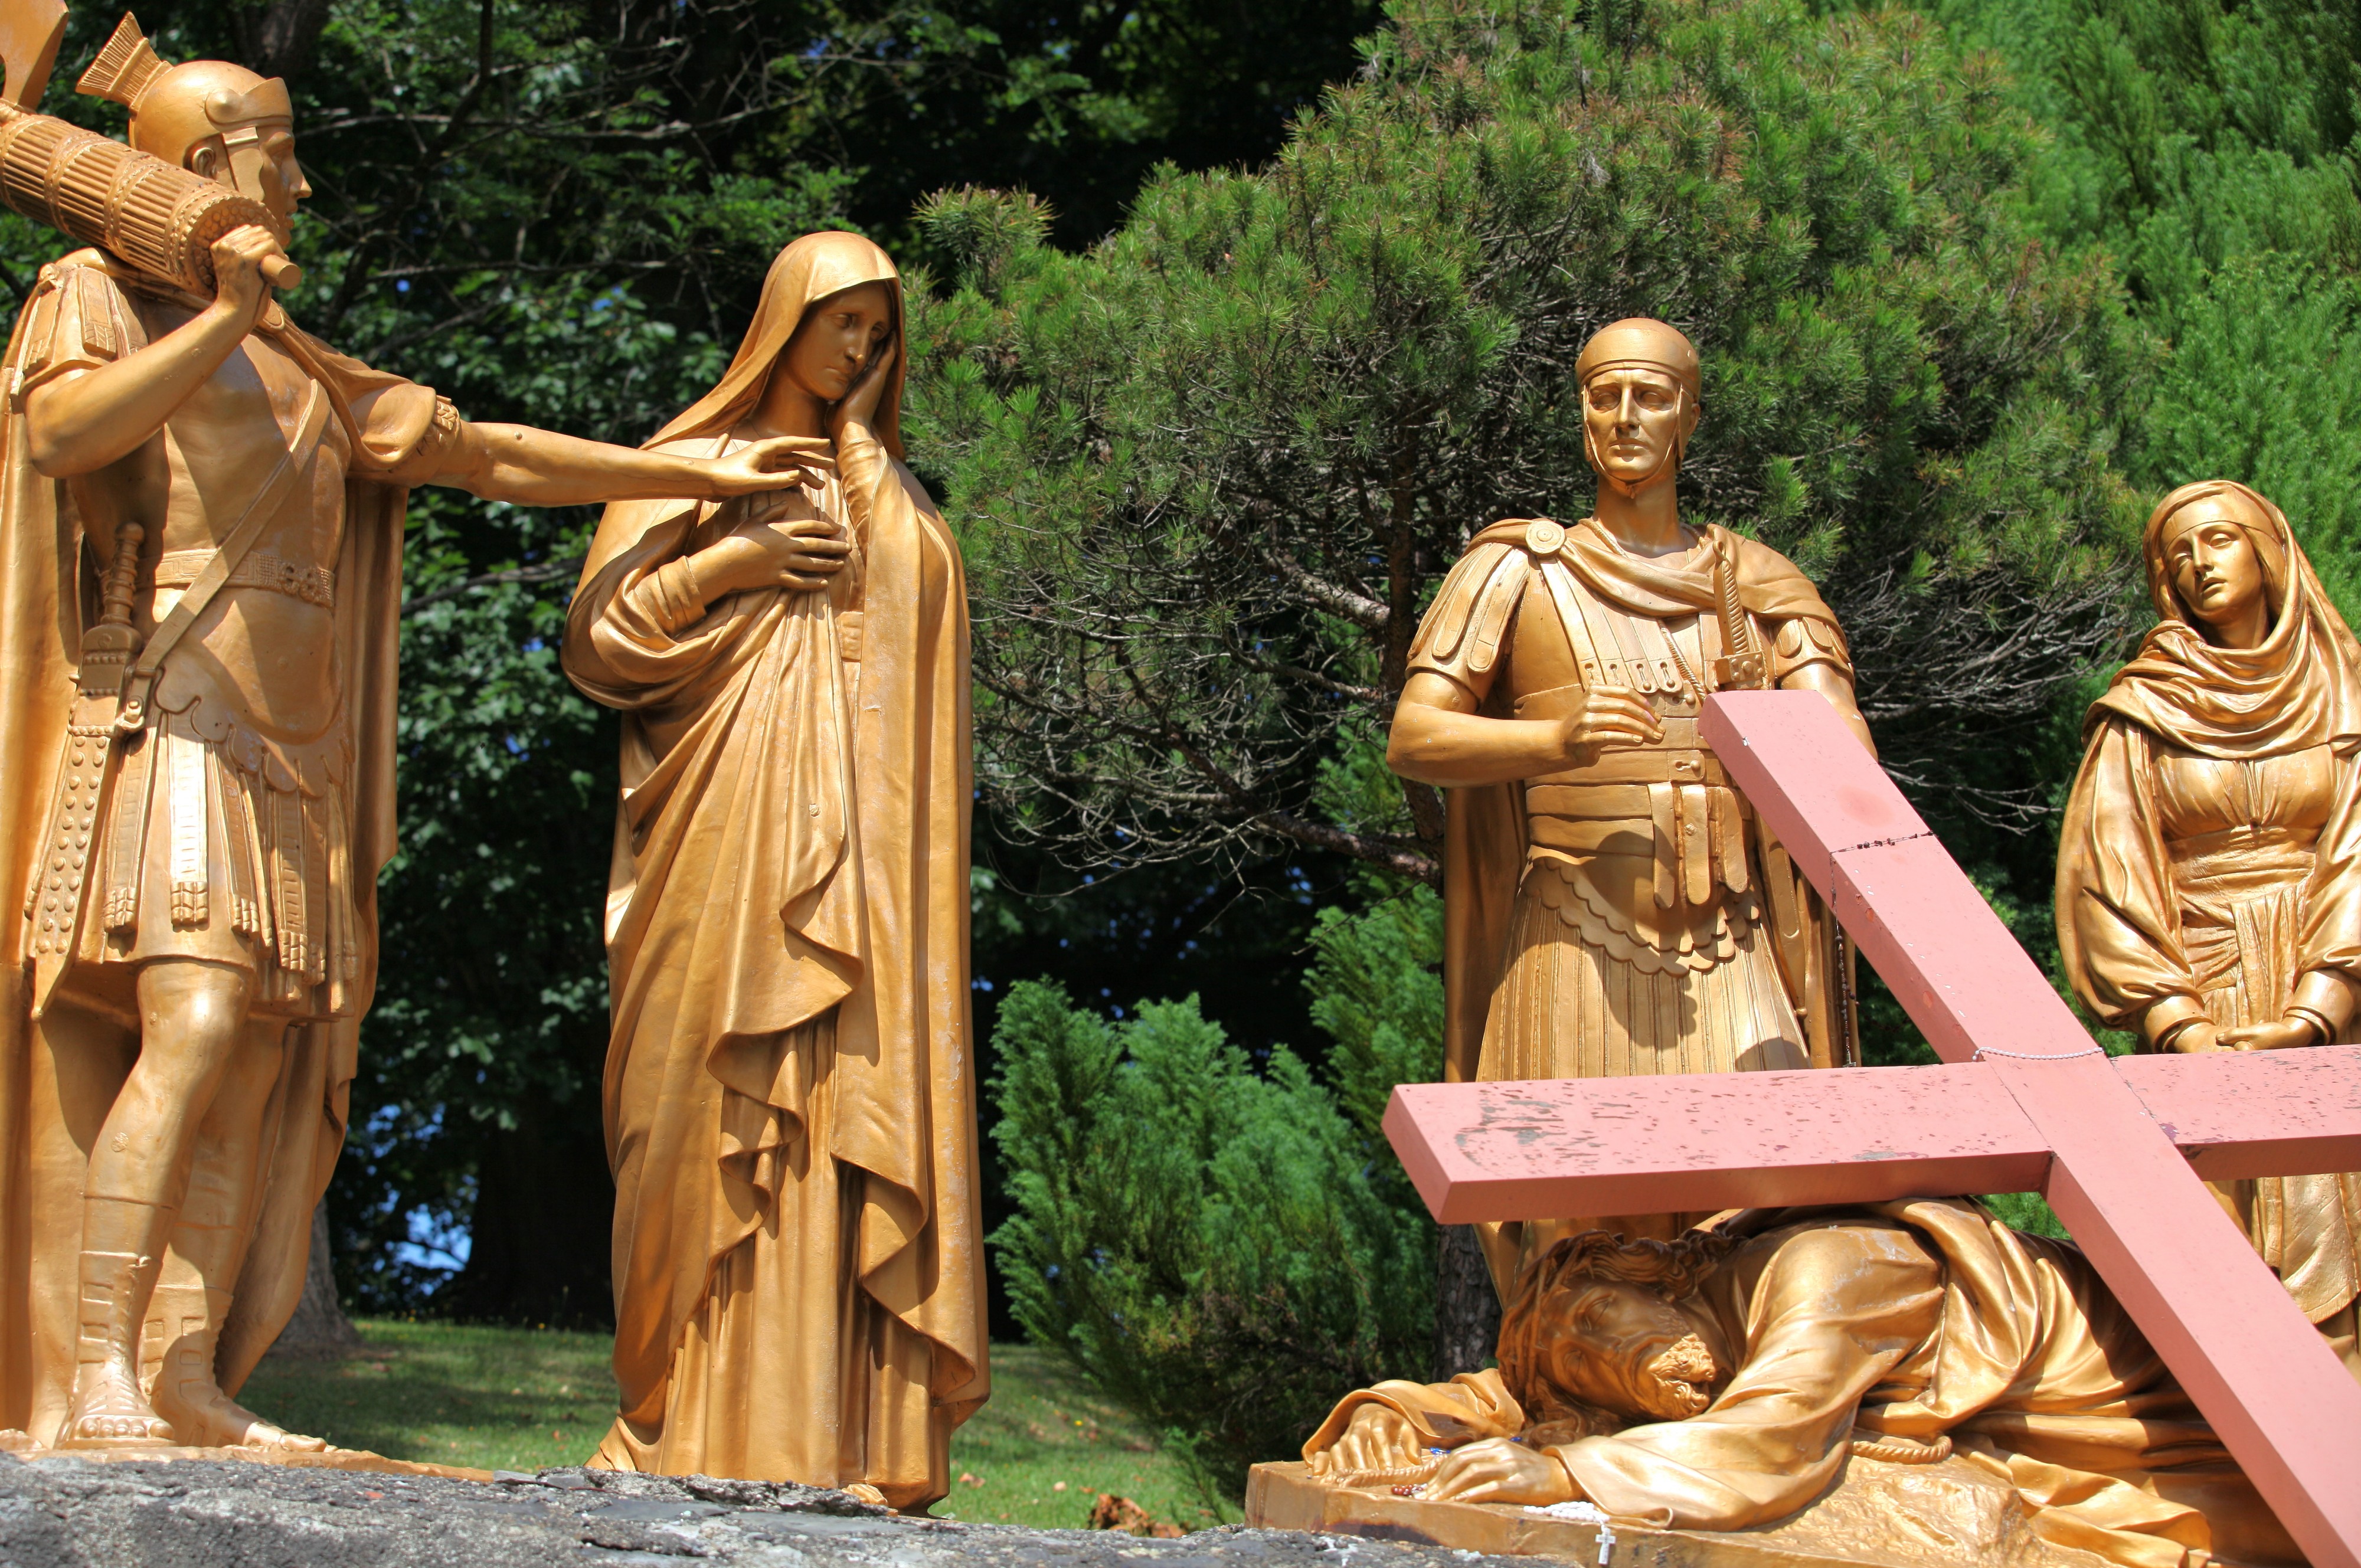 the Way of the Cross in Lourdes, France, August 2013, station 9/14